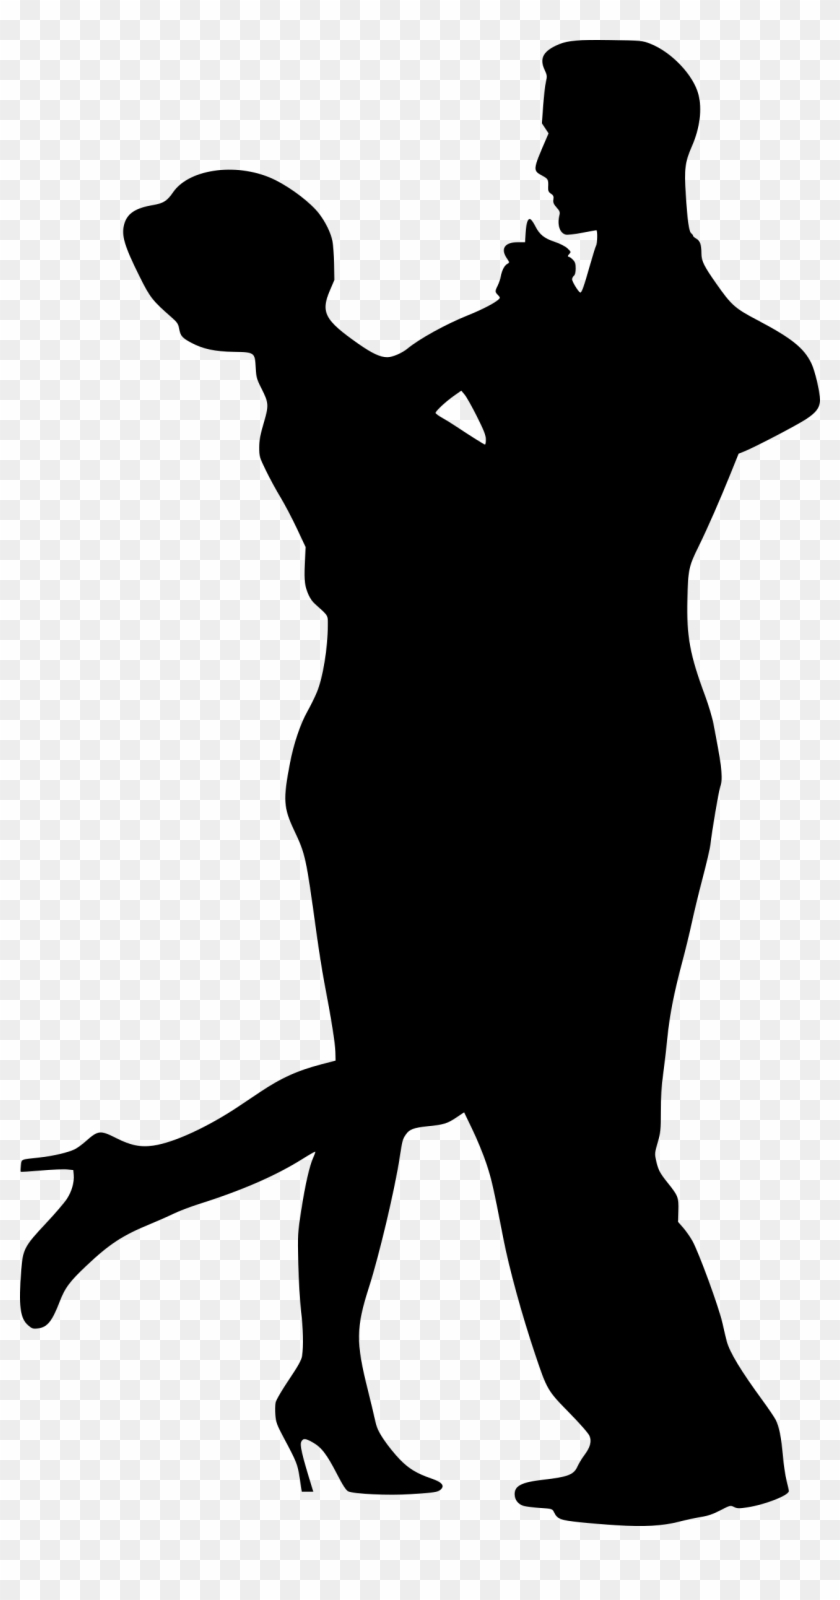 Dancing Couple 10 Icons Png - Couple Dancing Silhouette Png #1270913